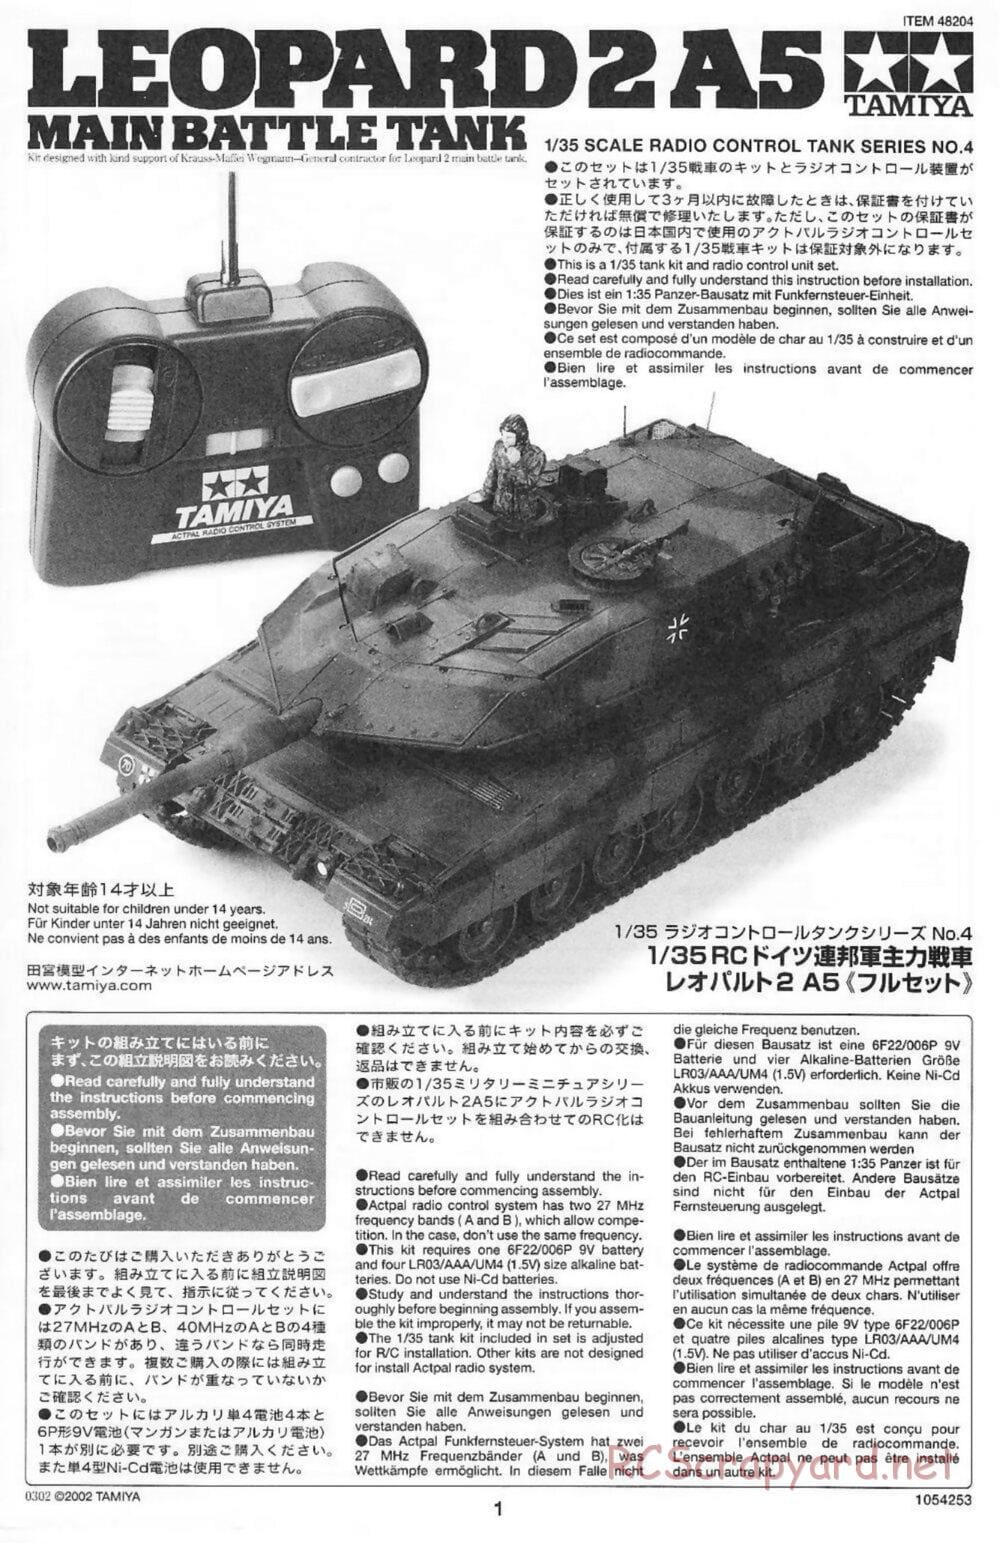 Tamiya - Leopard 2 A5 Main Battle Tank - 1/35 Scale Chassis - Manual - Page 1